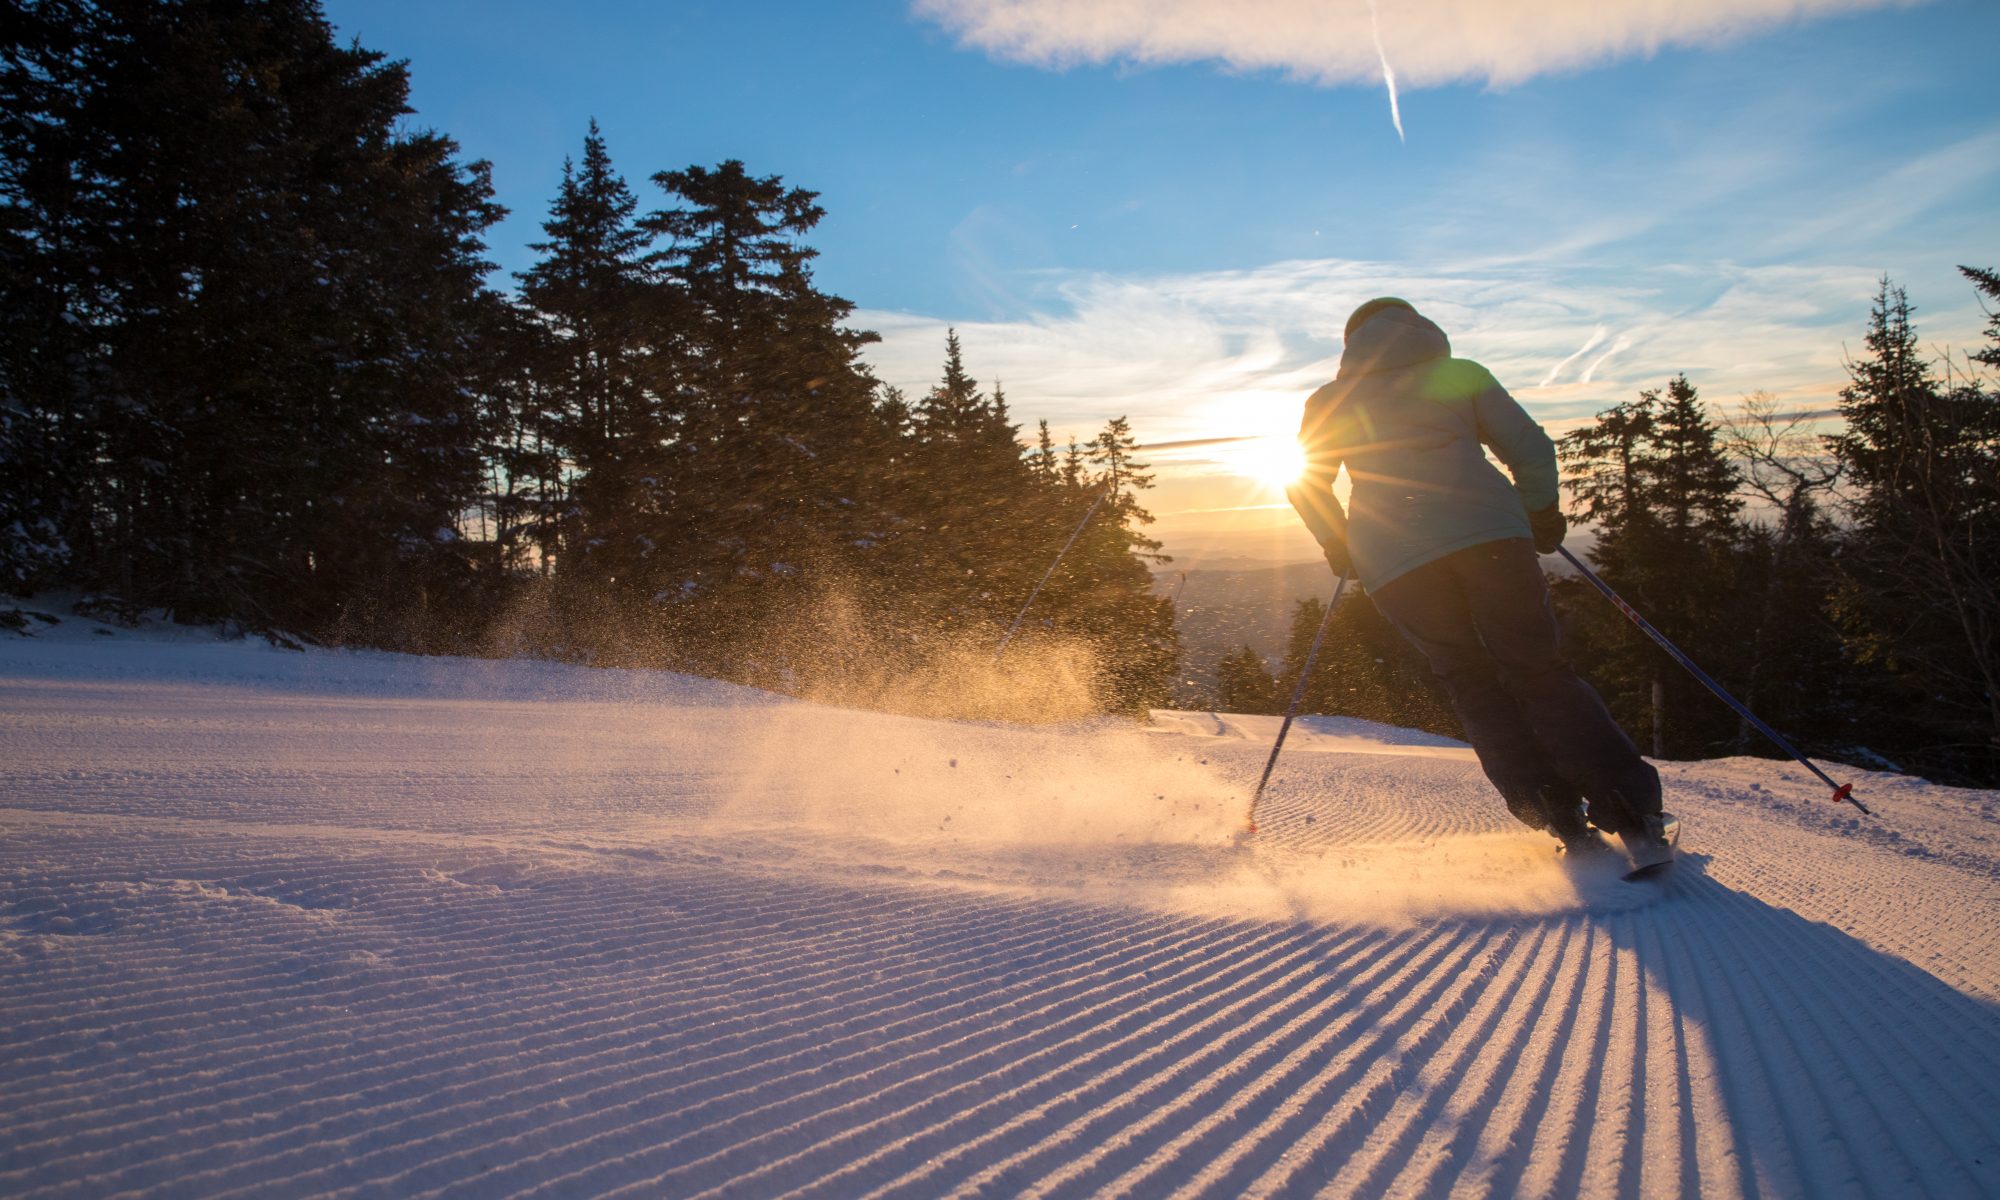 Mount Snow, one of the Peak Resorts bought by Vail Resorts. Photo: Mackenzie.